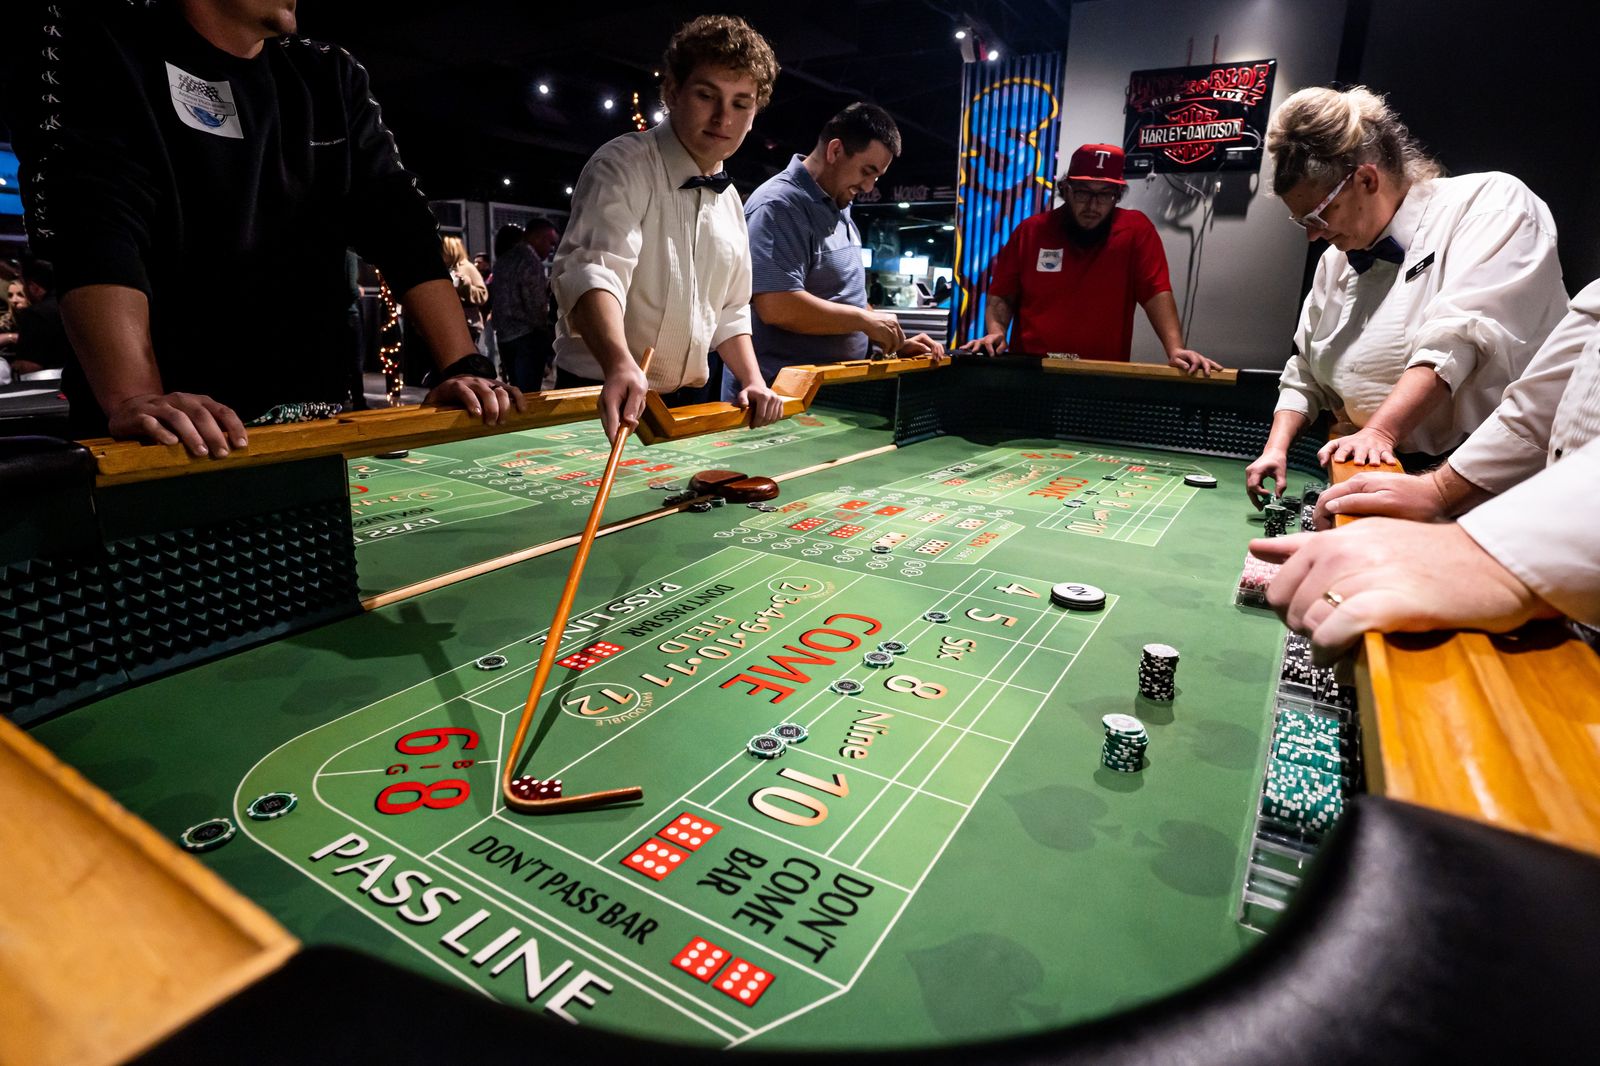 A casino at a corporate event provided hours of entertainment